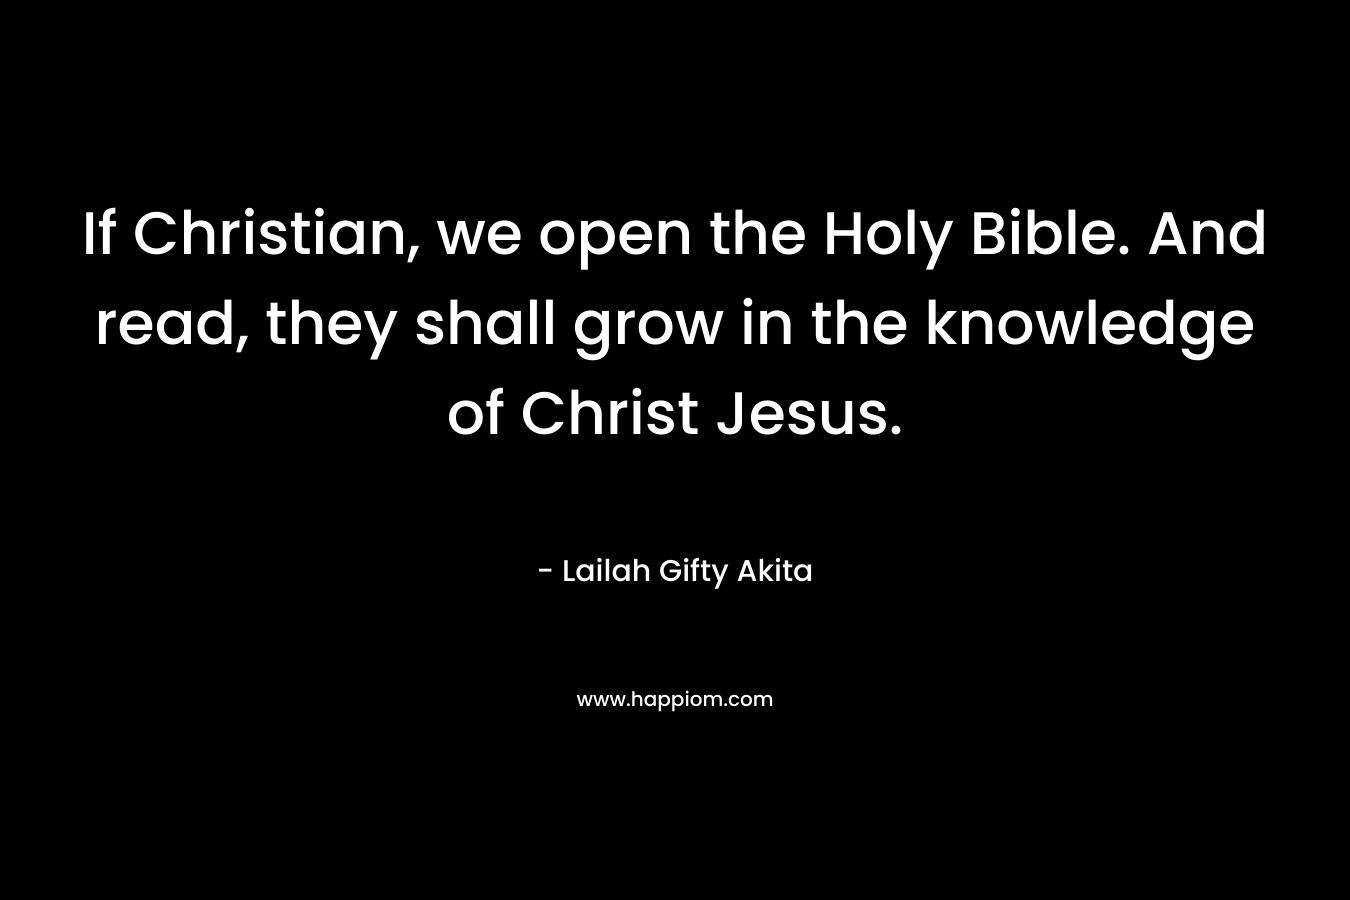 If Christian, we open the Holy Bible. And read, they shall grow in the knowledge of Christ Jesus.